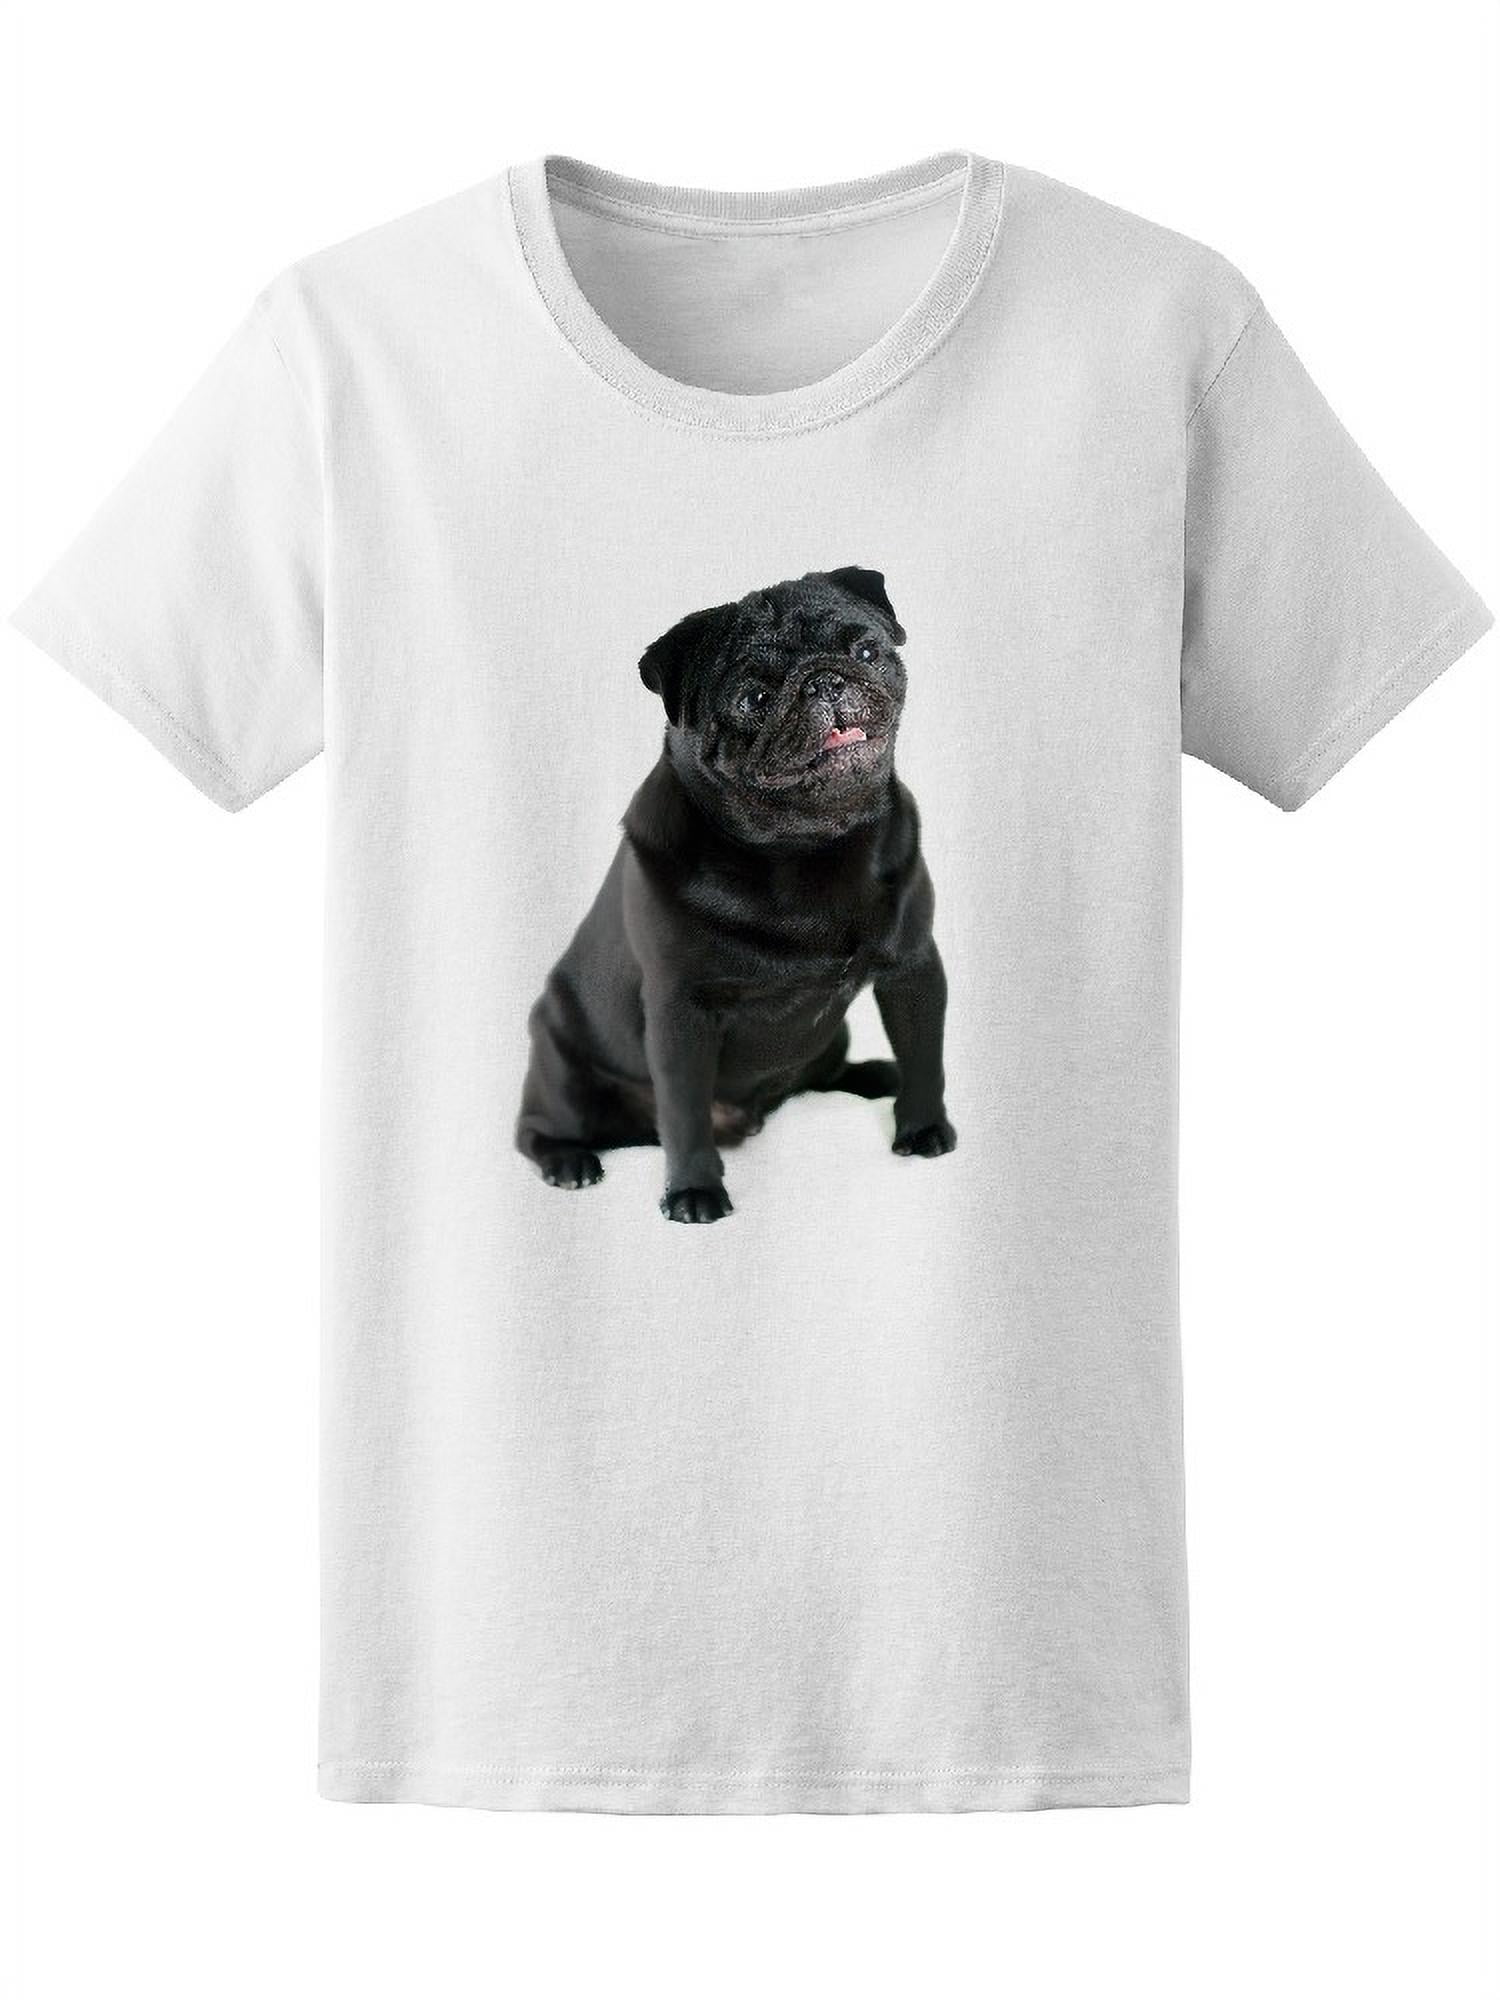 3D Printed T-Shirts Summer with Funny Pug Dog in Sunglasses Eating Watermelon Short Sleeve Tops Tees